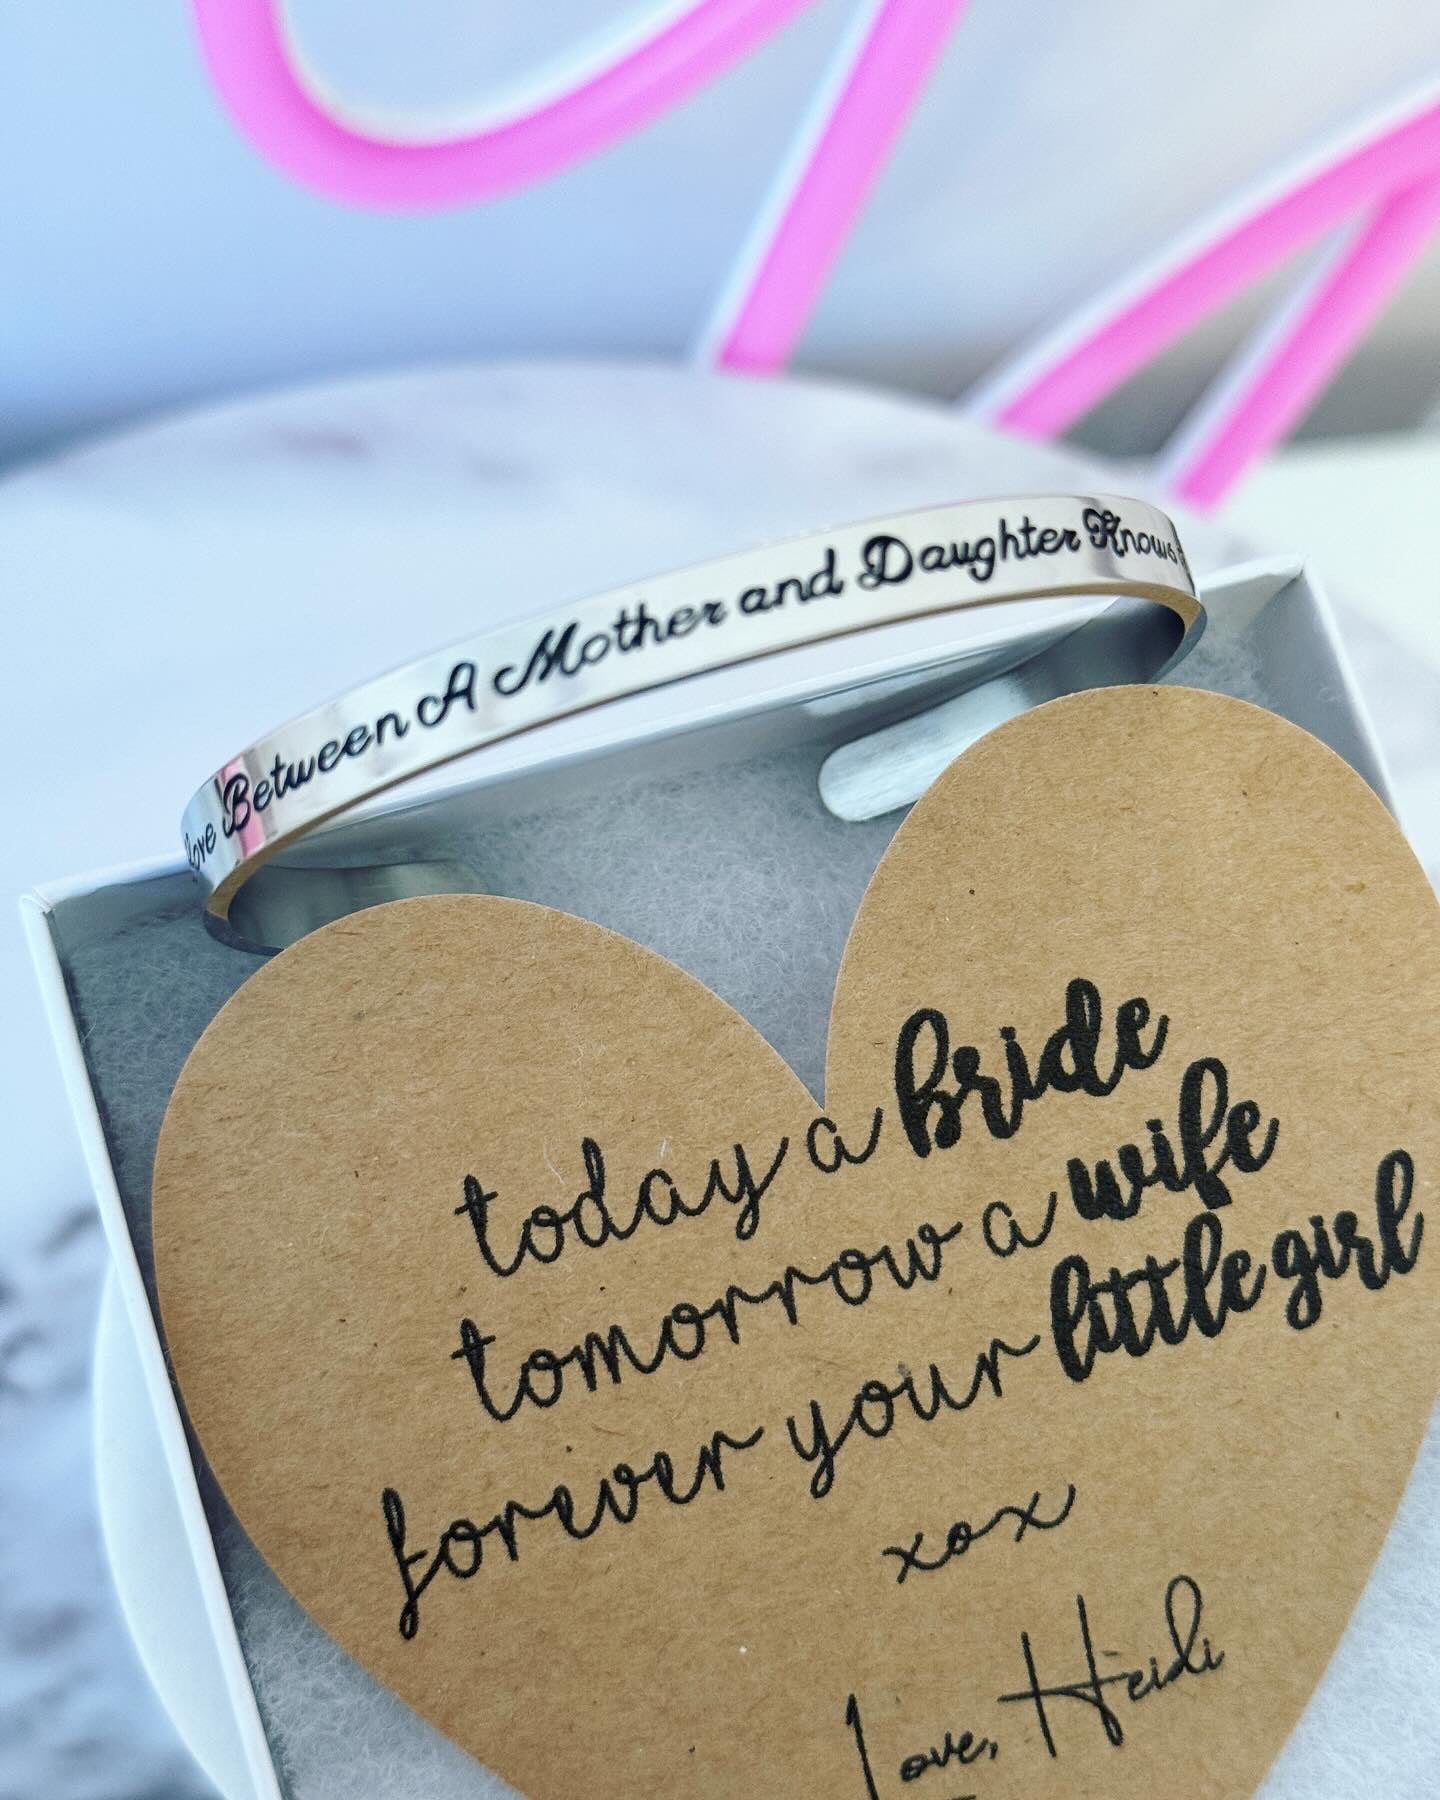 Mother of the Bride Engraved Cuff Bangle